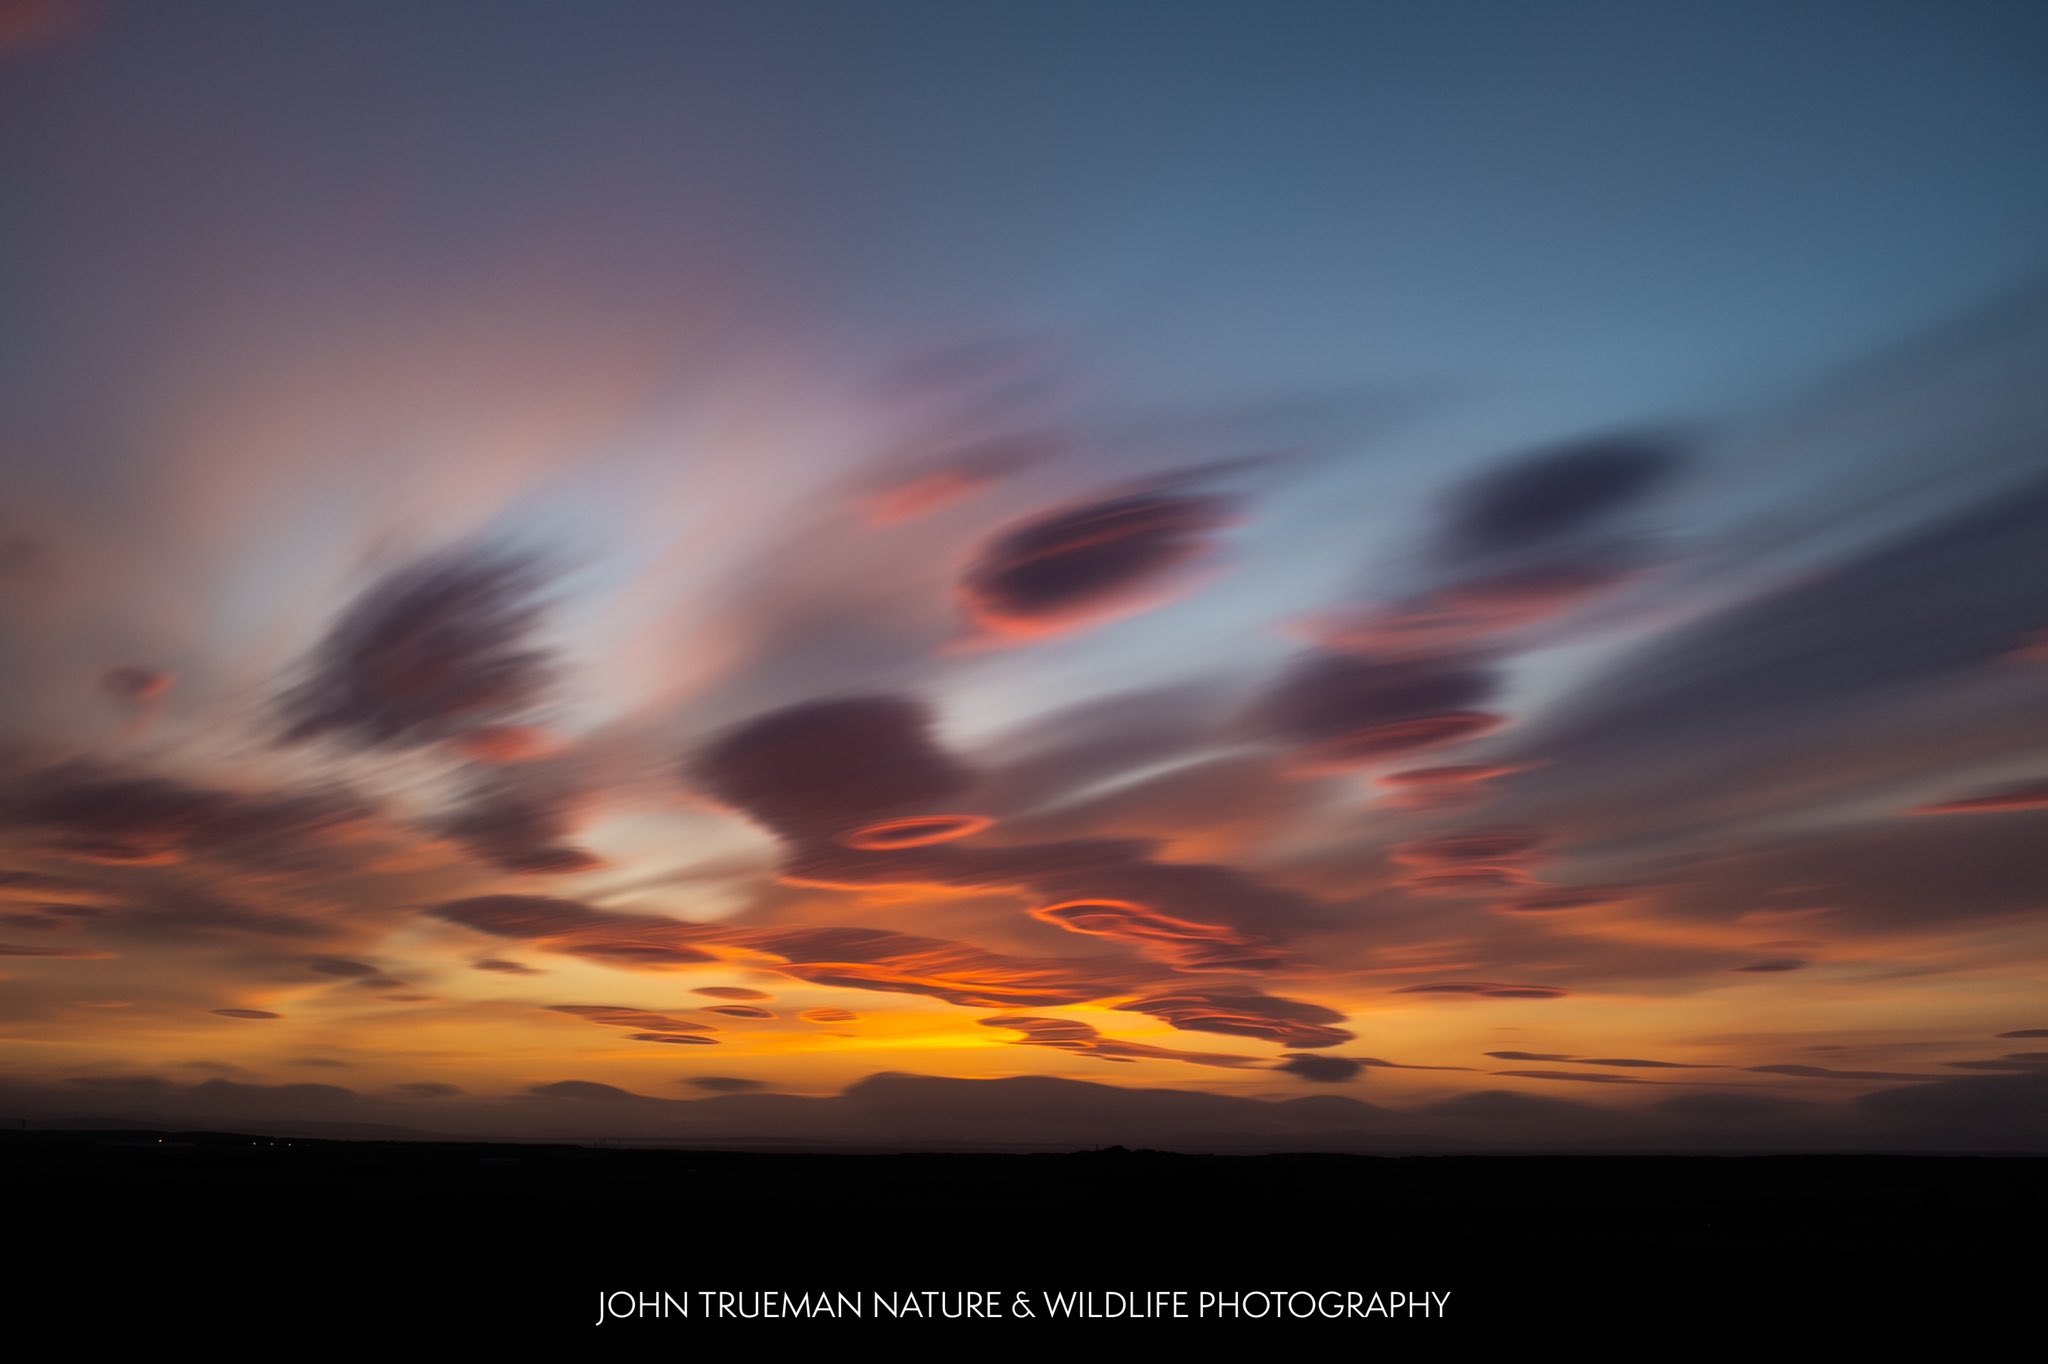 1st Place Looking out over the Moray Firth by John Trueman @jotrphoto